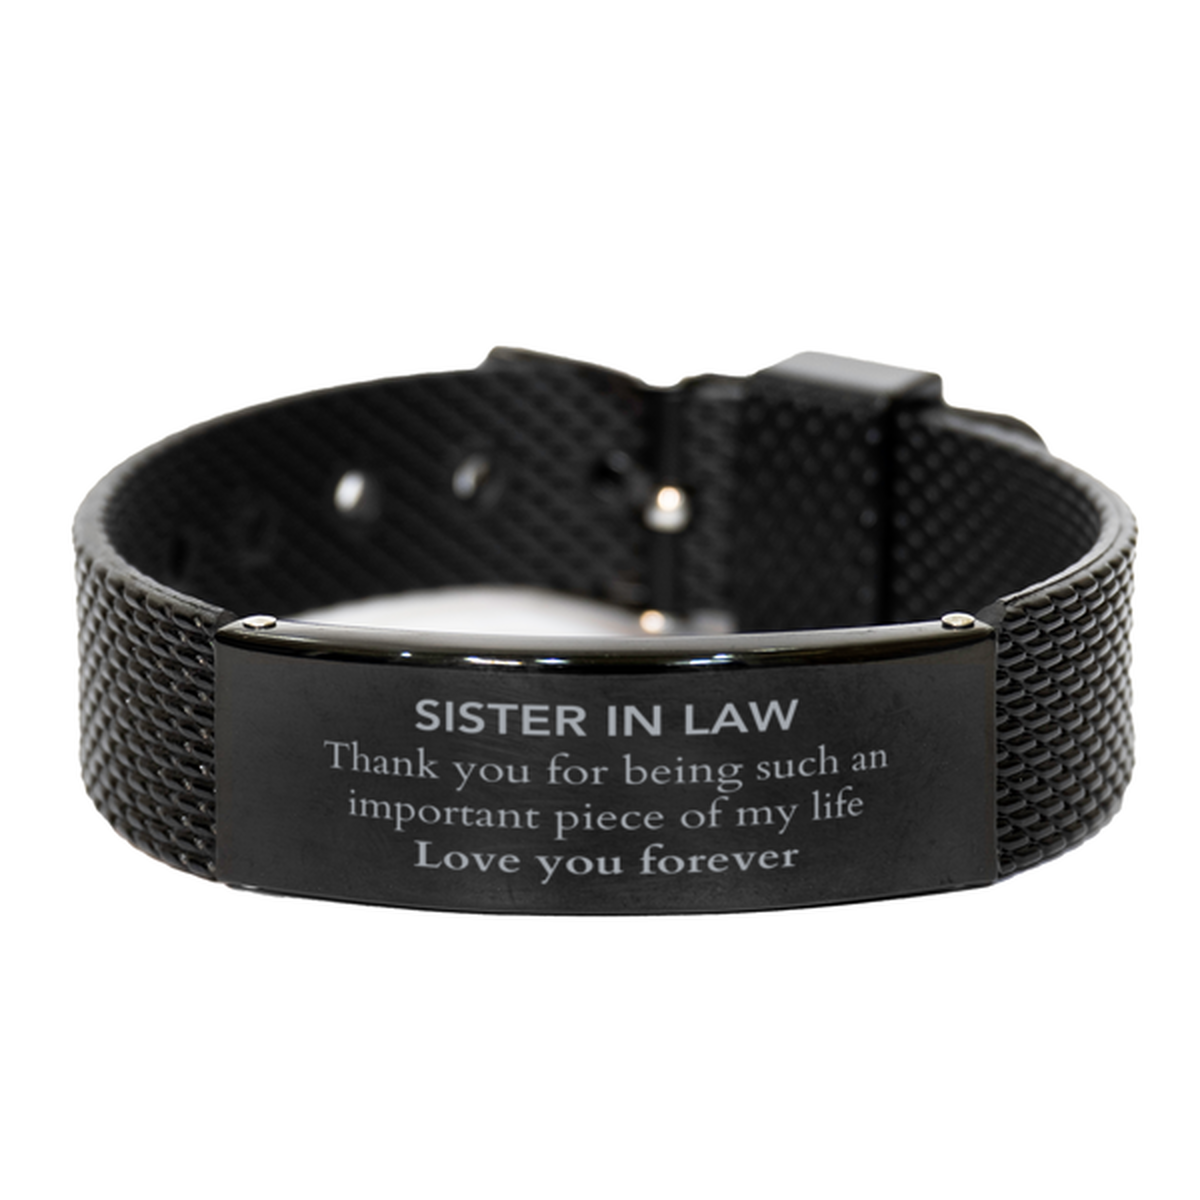 Appropriate Sister In Law Black Shark Mesh Bracelet Epic Birthday Gifts for Sister In Law Thank you for being such an important piece of my life Sister In Law Christmas Mothers Fathers Day